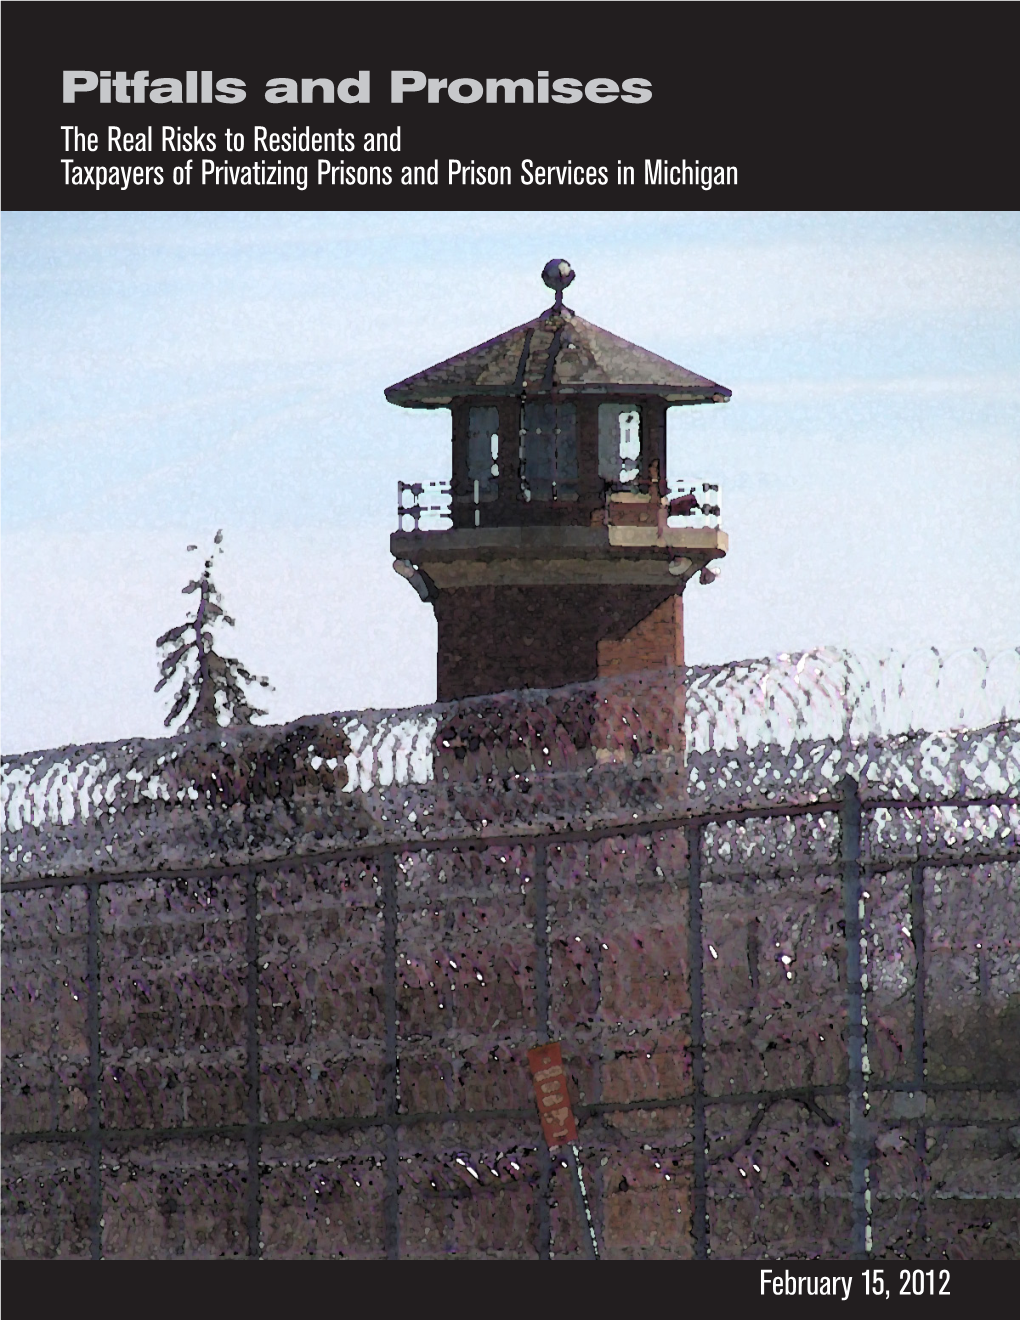 Pitfalls and Promises the Real Risks to Residents and Taxpayers of Privatizing Prisons and Prison Services in Michigan